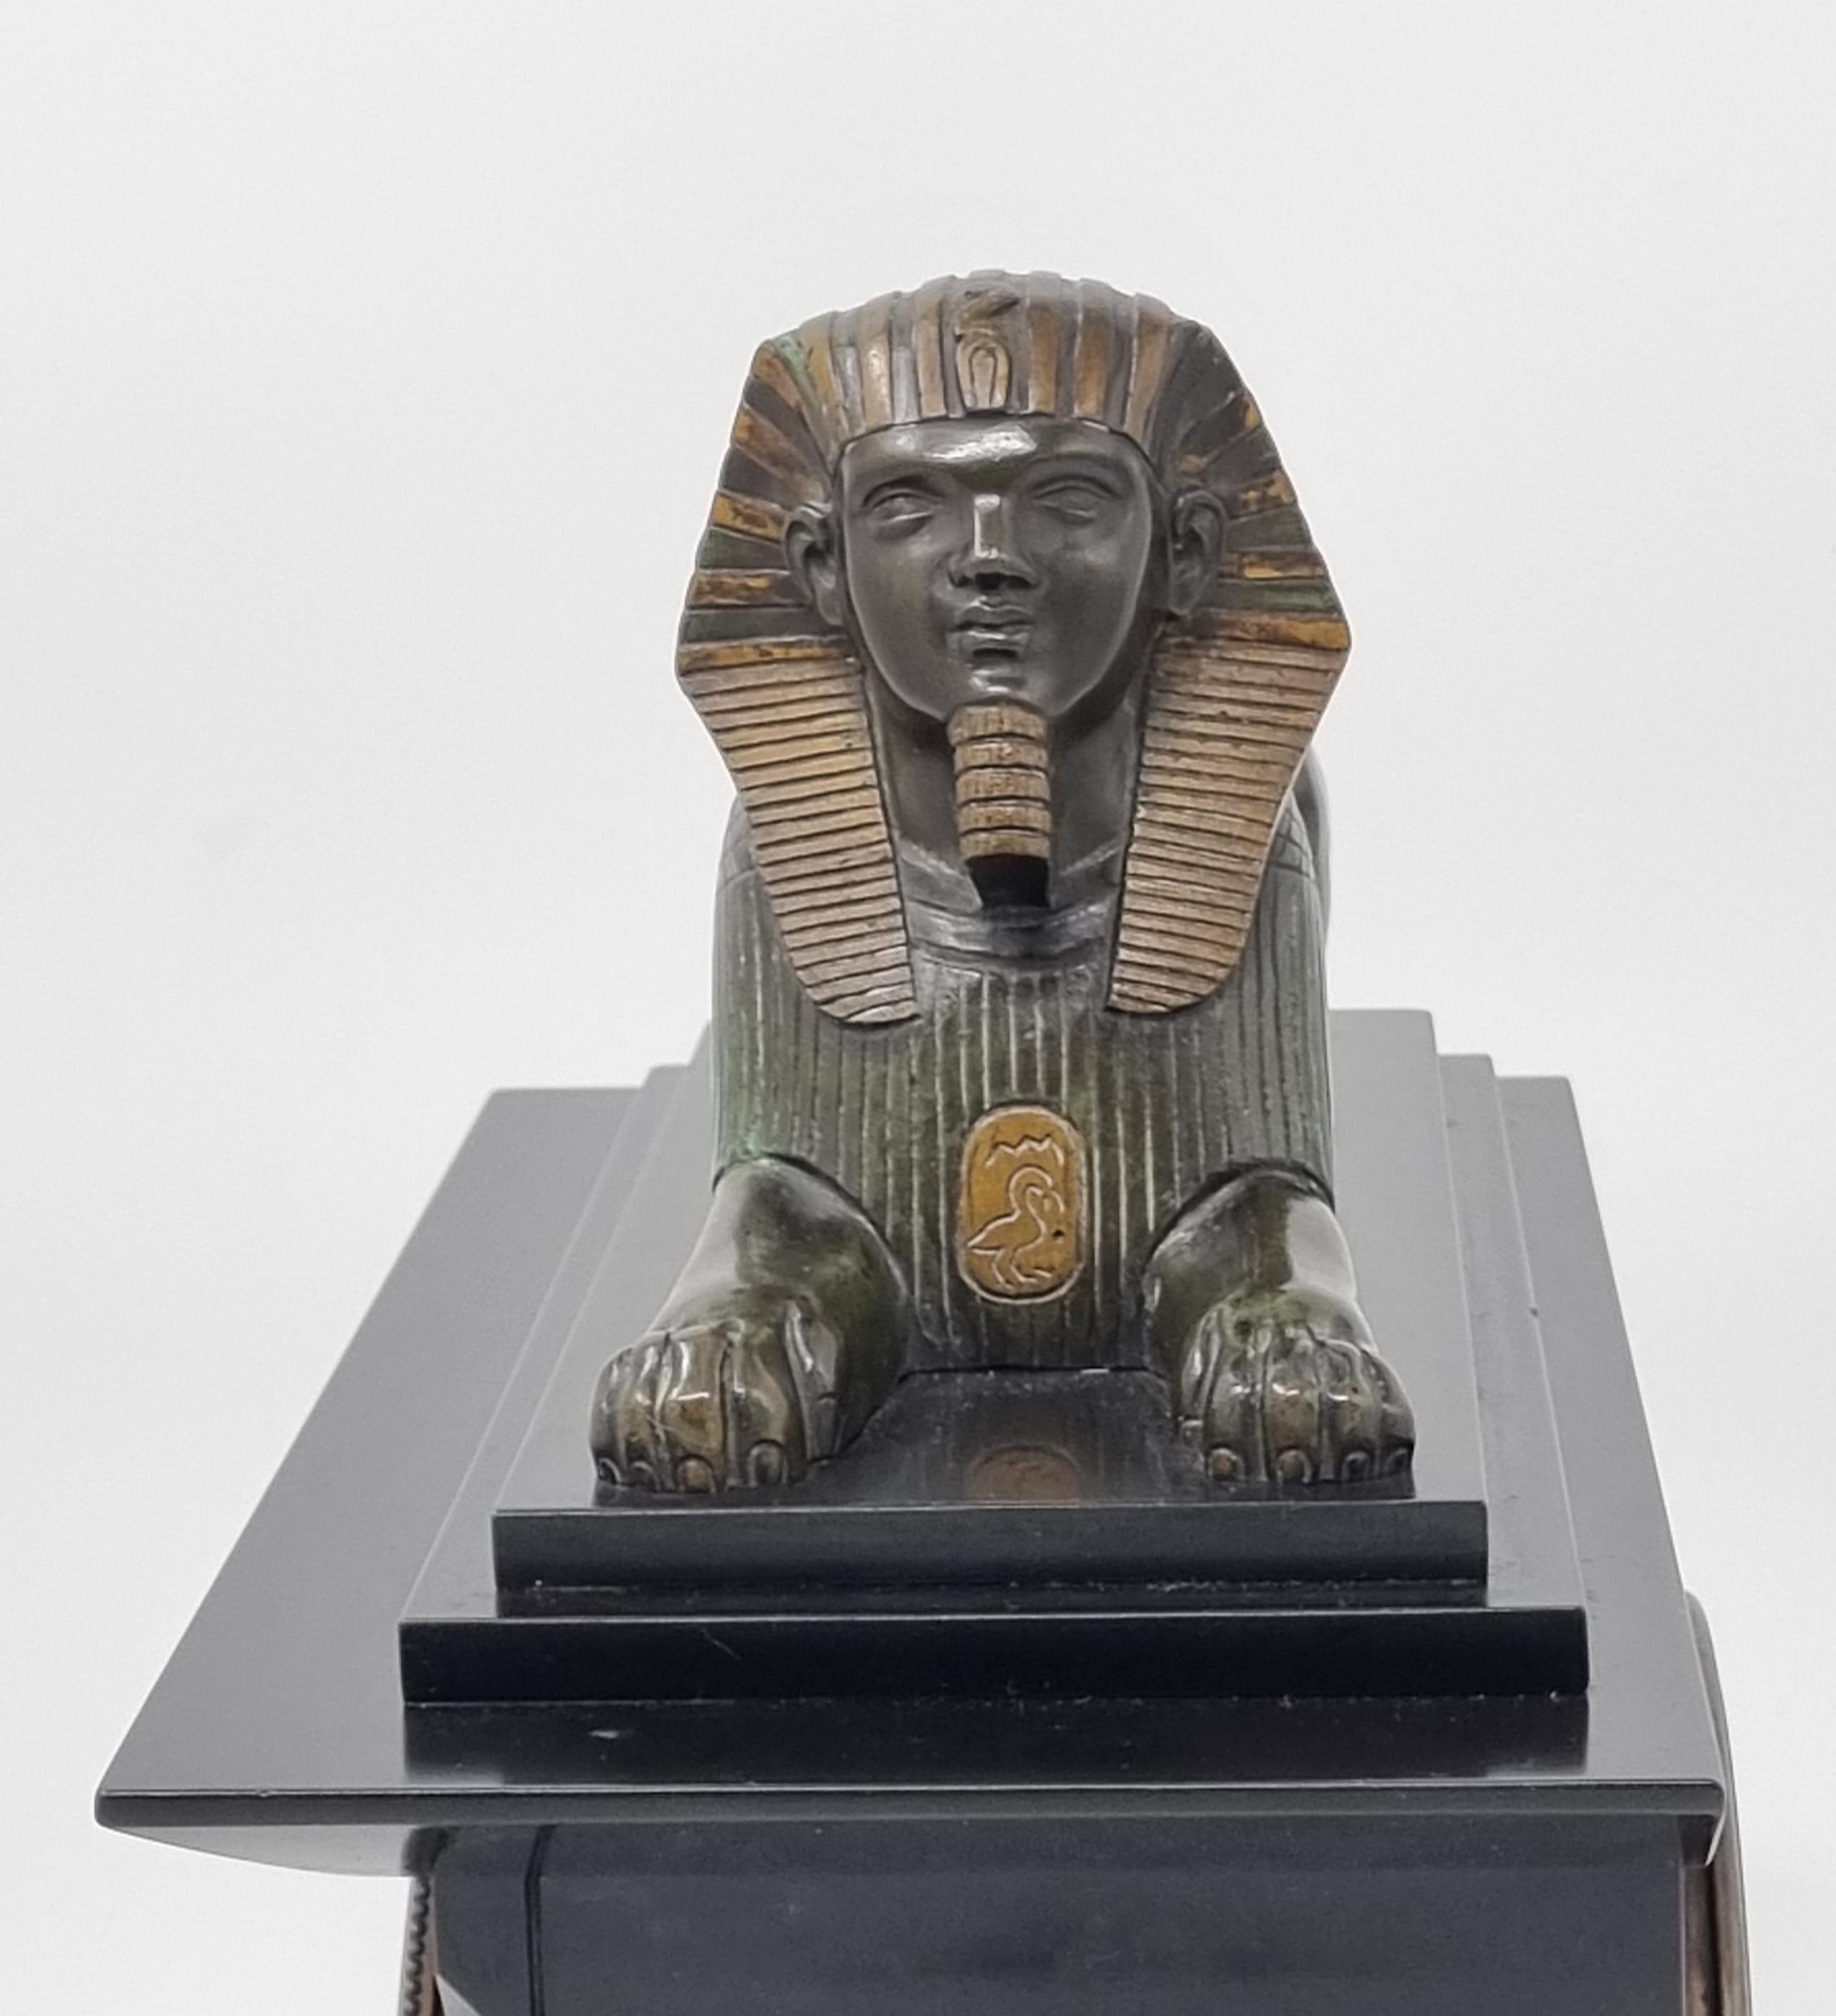 An elegant 19th Century Egyptian Revival Clock, black marble , adorned with intricate Egyptian engravings with a bronze sphinx majestically mounted on the top . This exquisite timepiece boasts a sleek and timeless design,  a testament to the